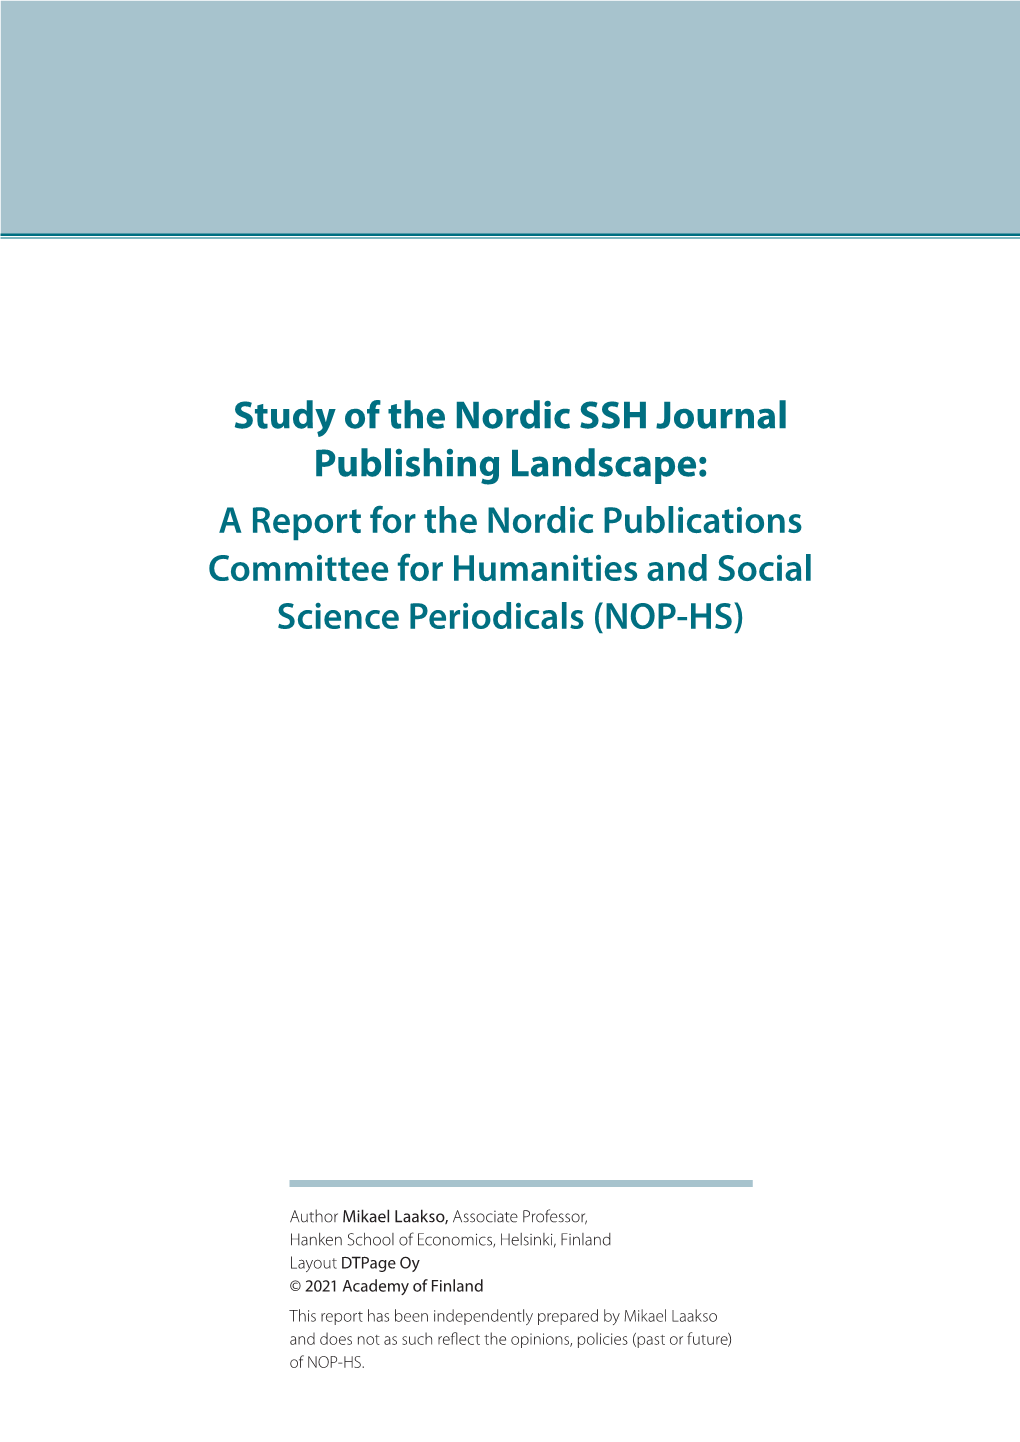 Study of the Nordic SSH Journal Publishing Landscape: a Report for the Nordic Publications Committee for Humanities and Social Science Periodicals (NOP-HS)